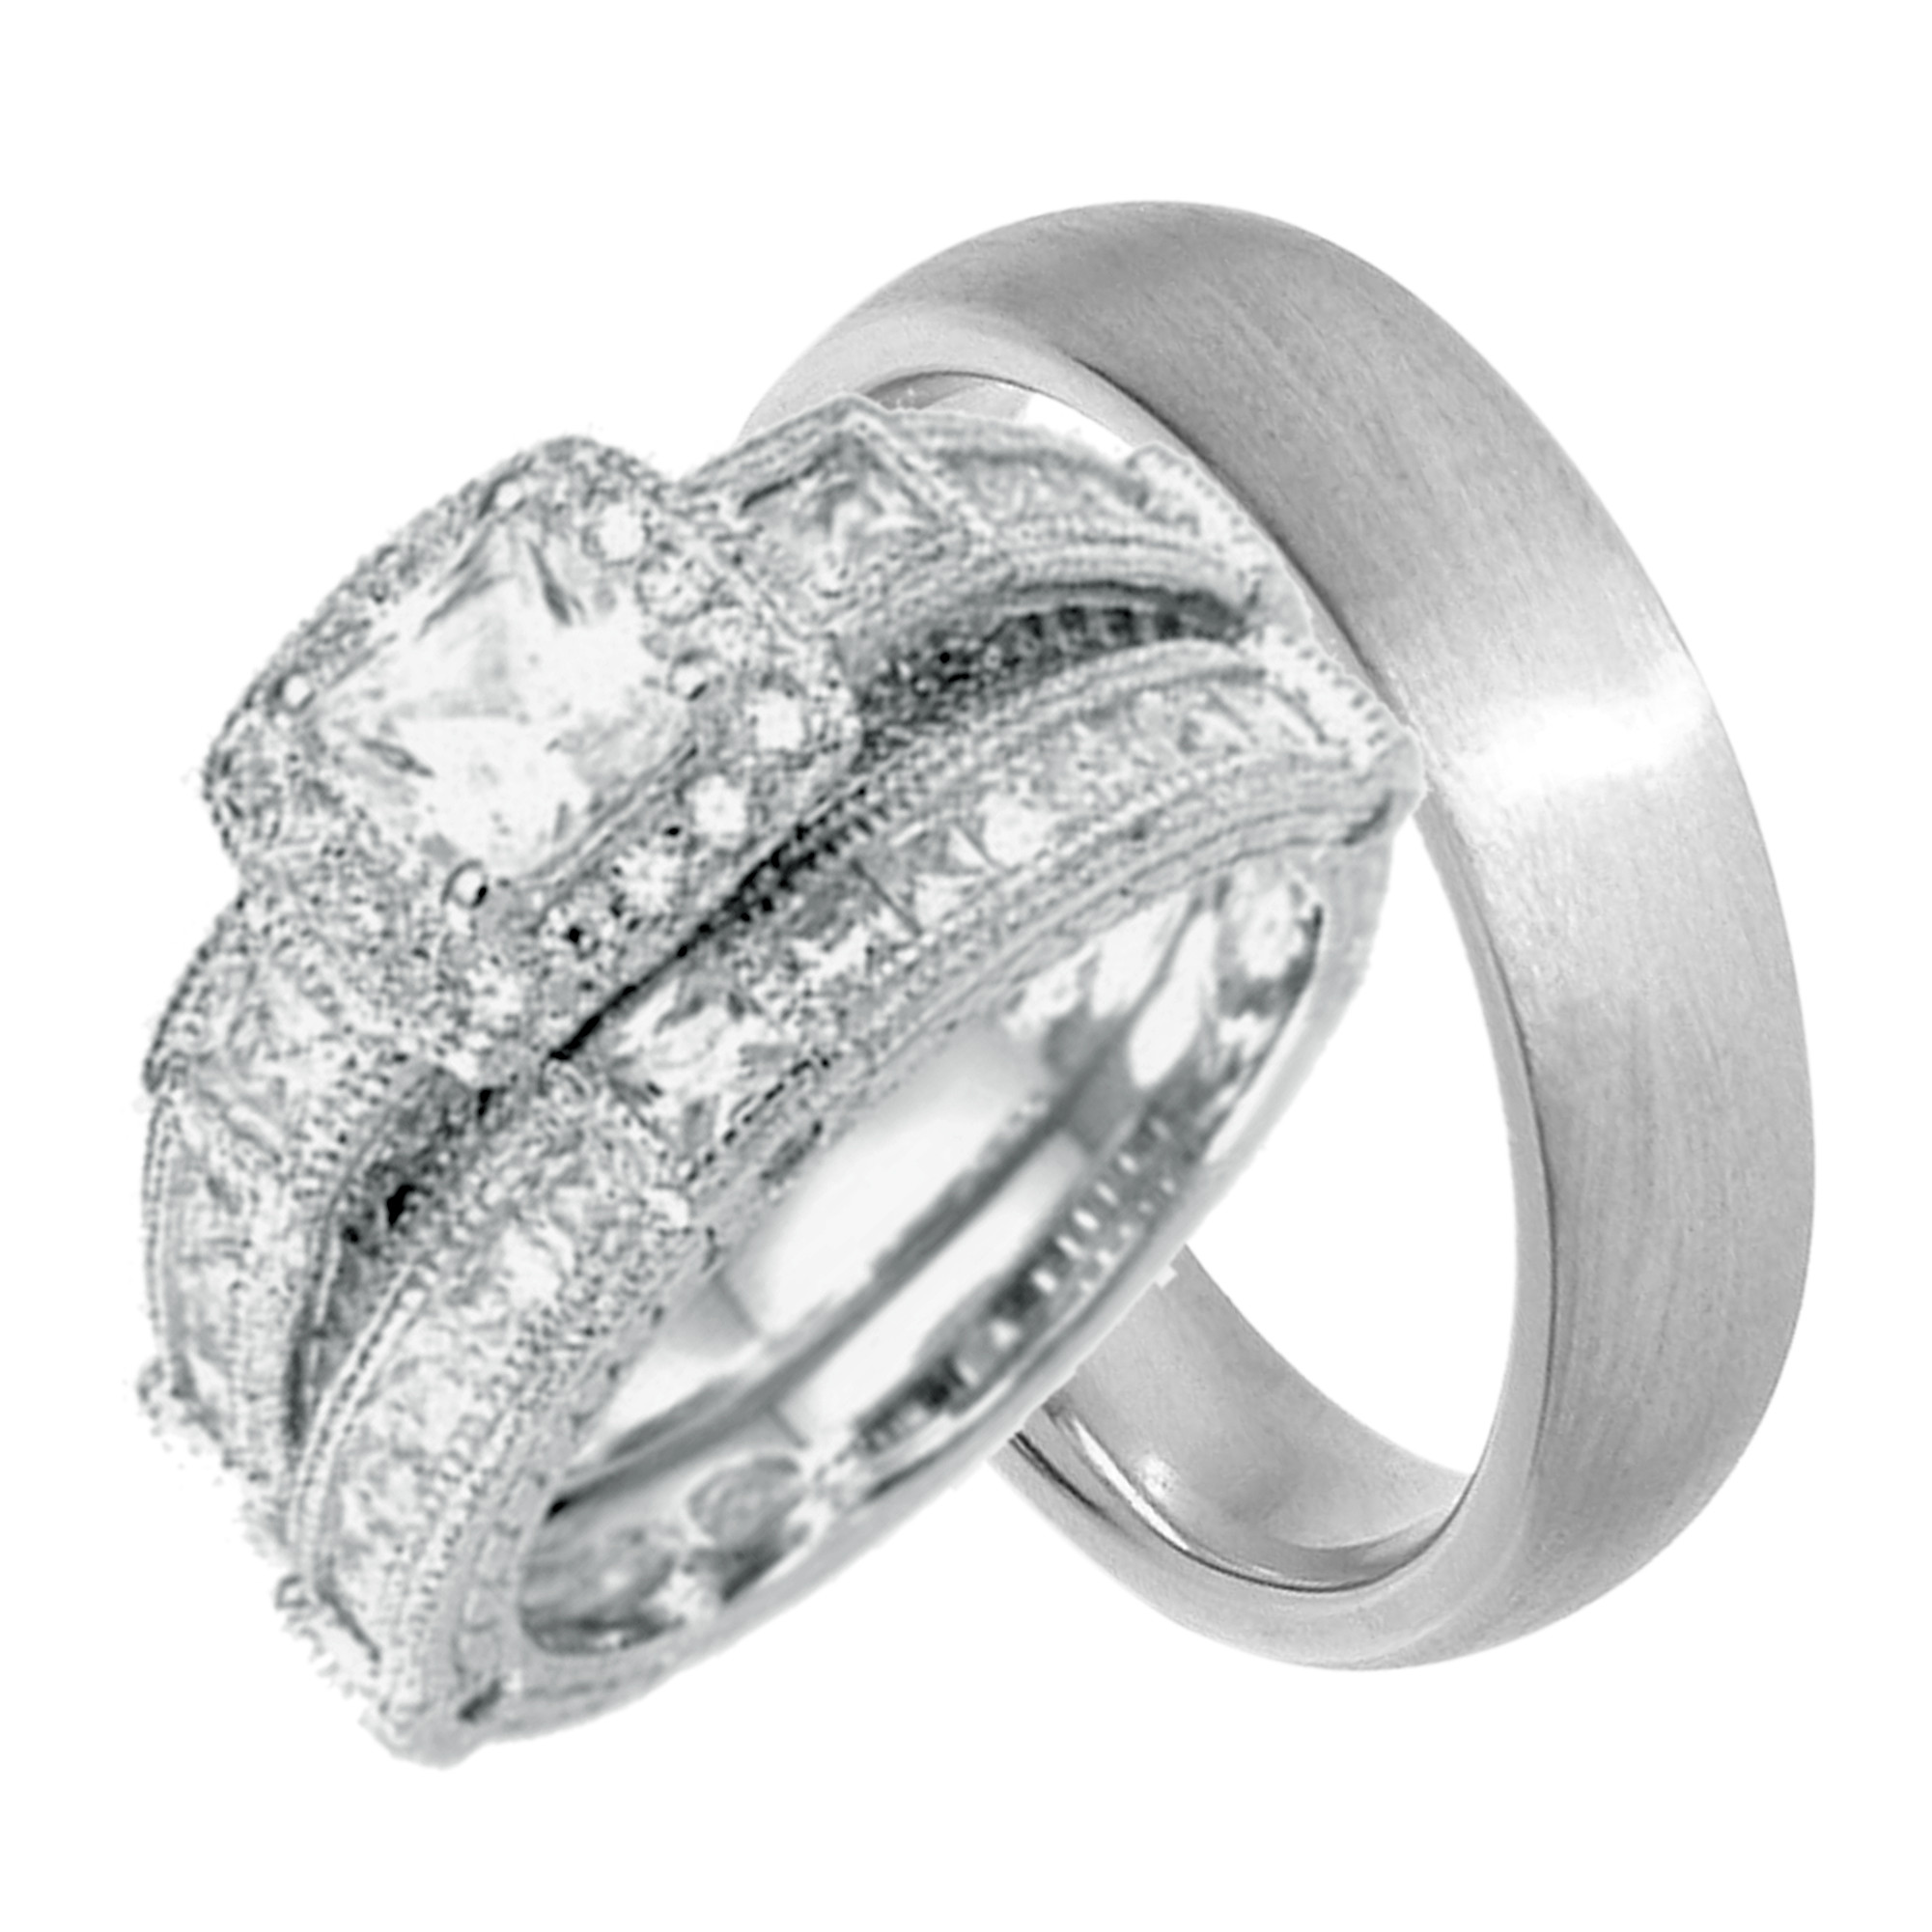 Wedding Rings Sets His And Hers For Cheap
 LaRaso & Co His and Hers Wedding Ring Set Cheap Wedding